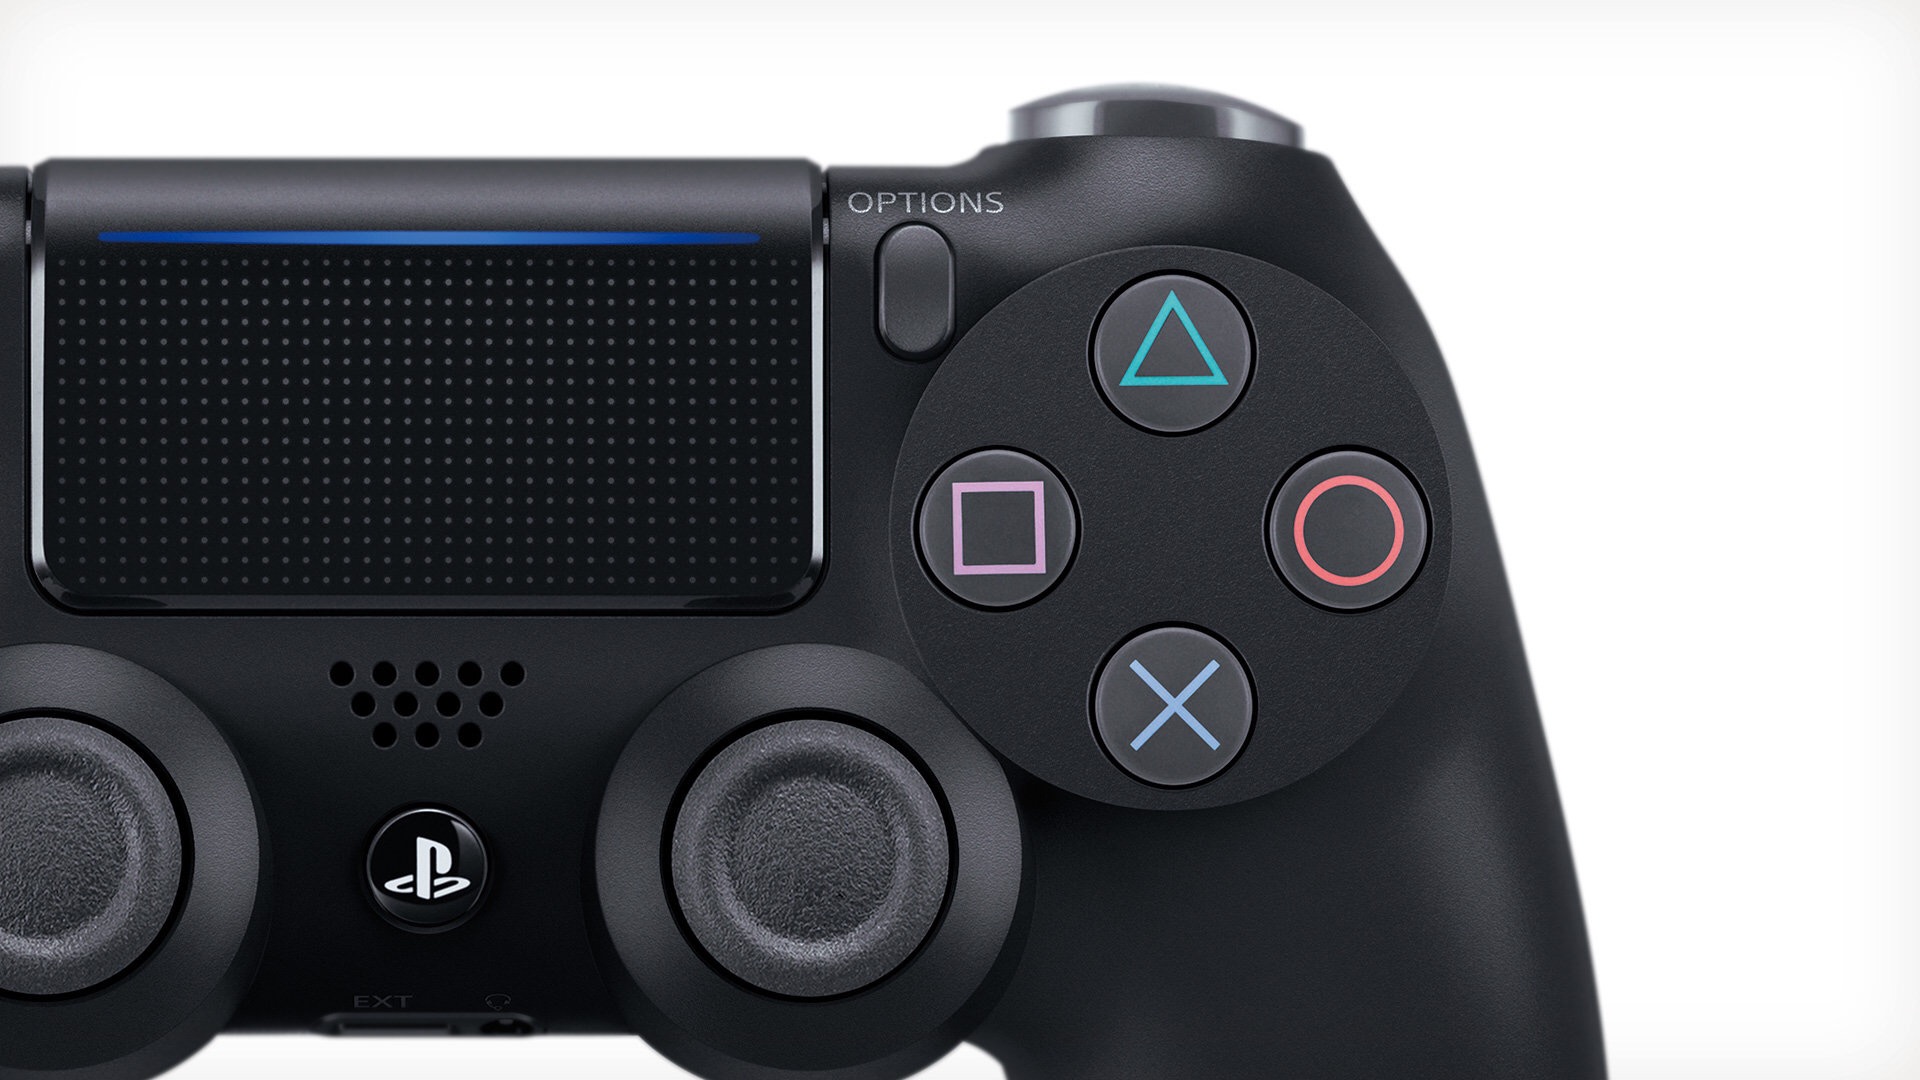 use ps4 controller on xbox one